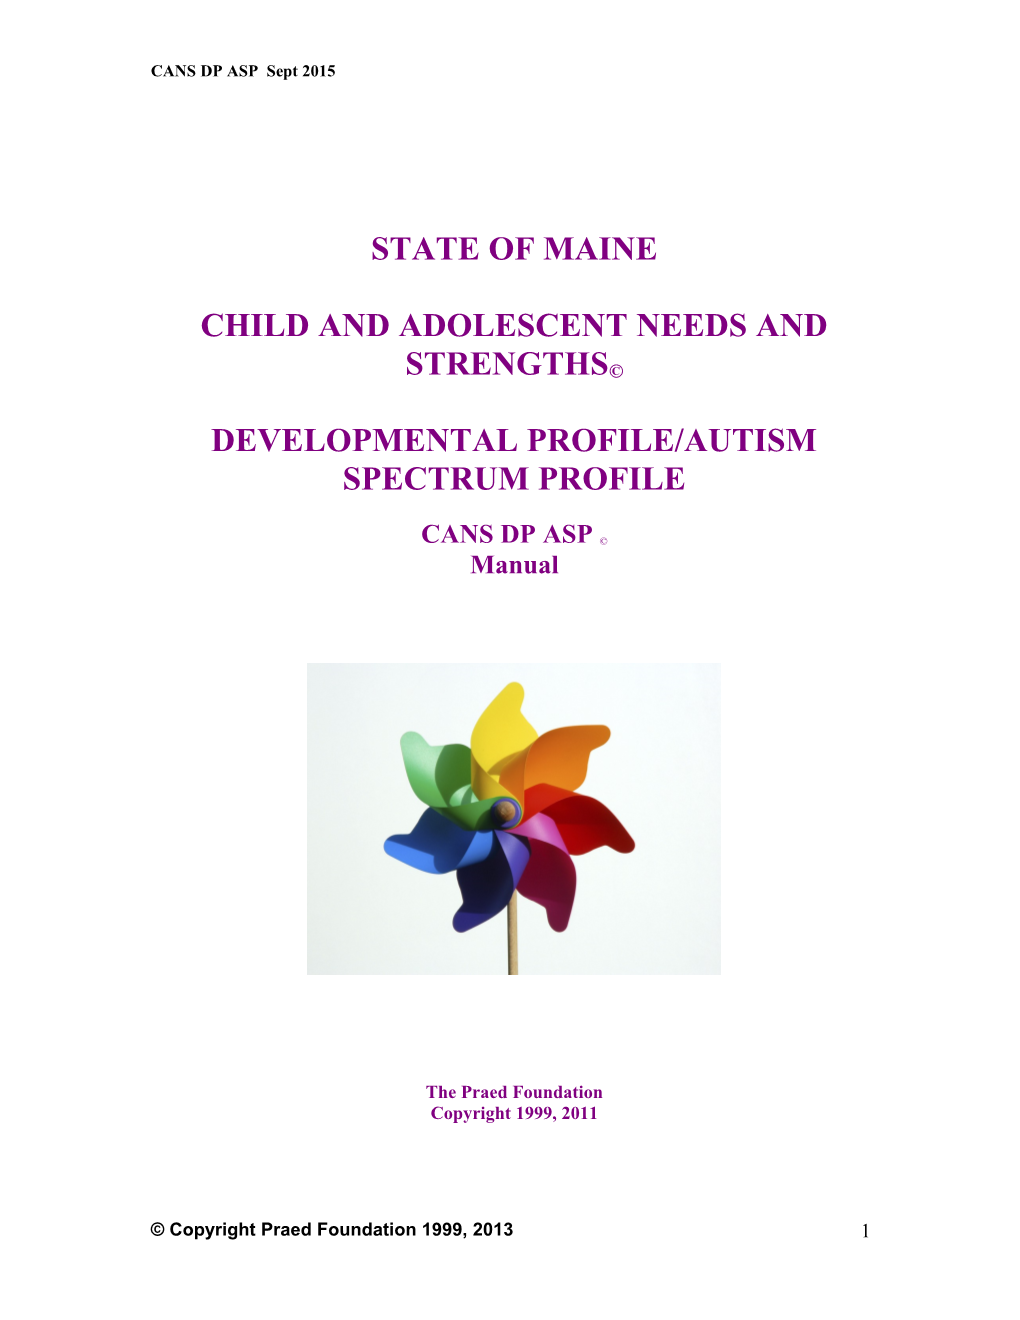 Child and Adolescent Needs and Strengths